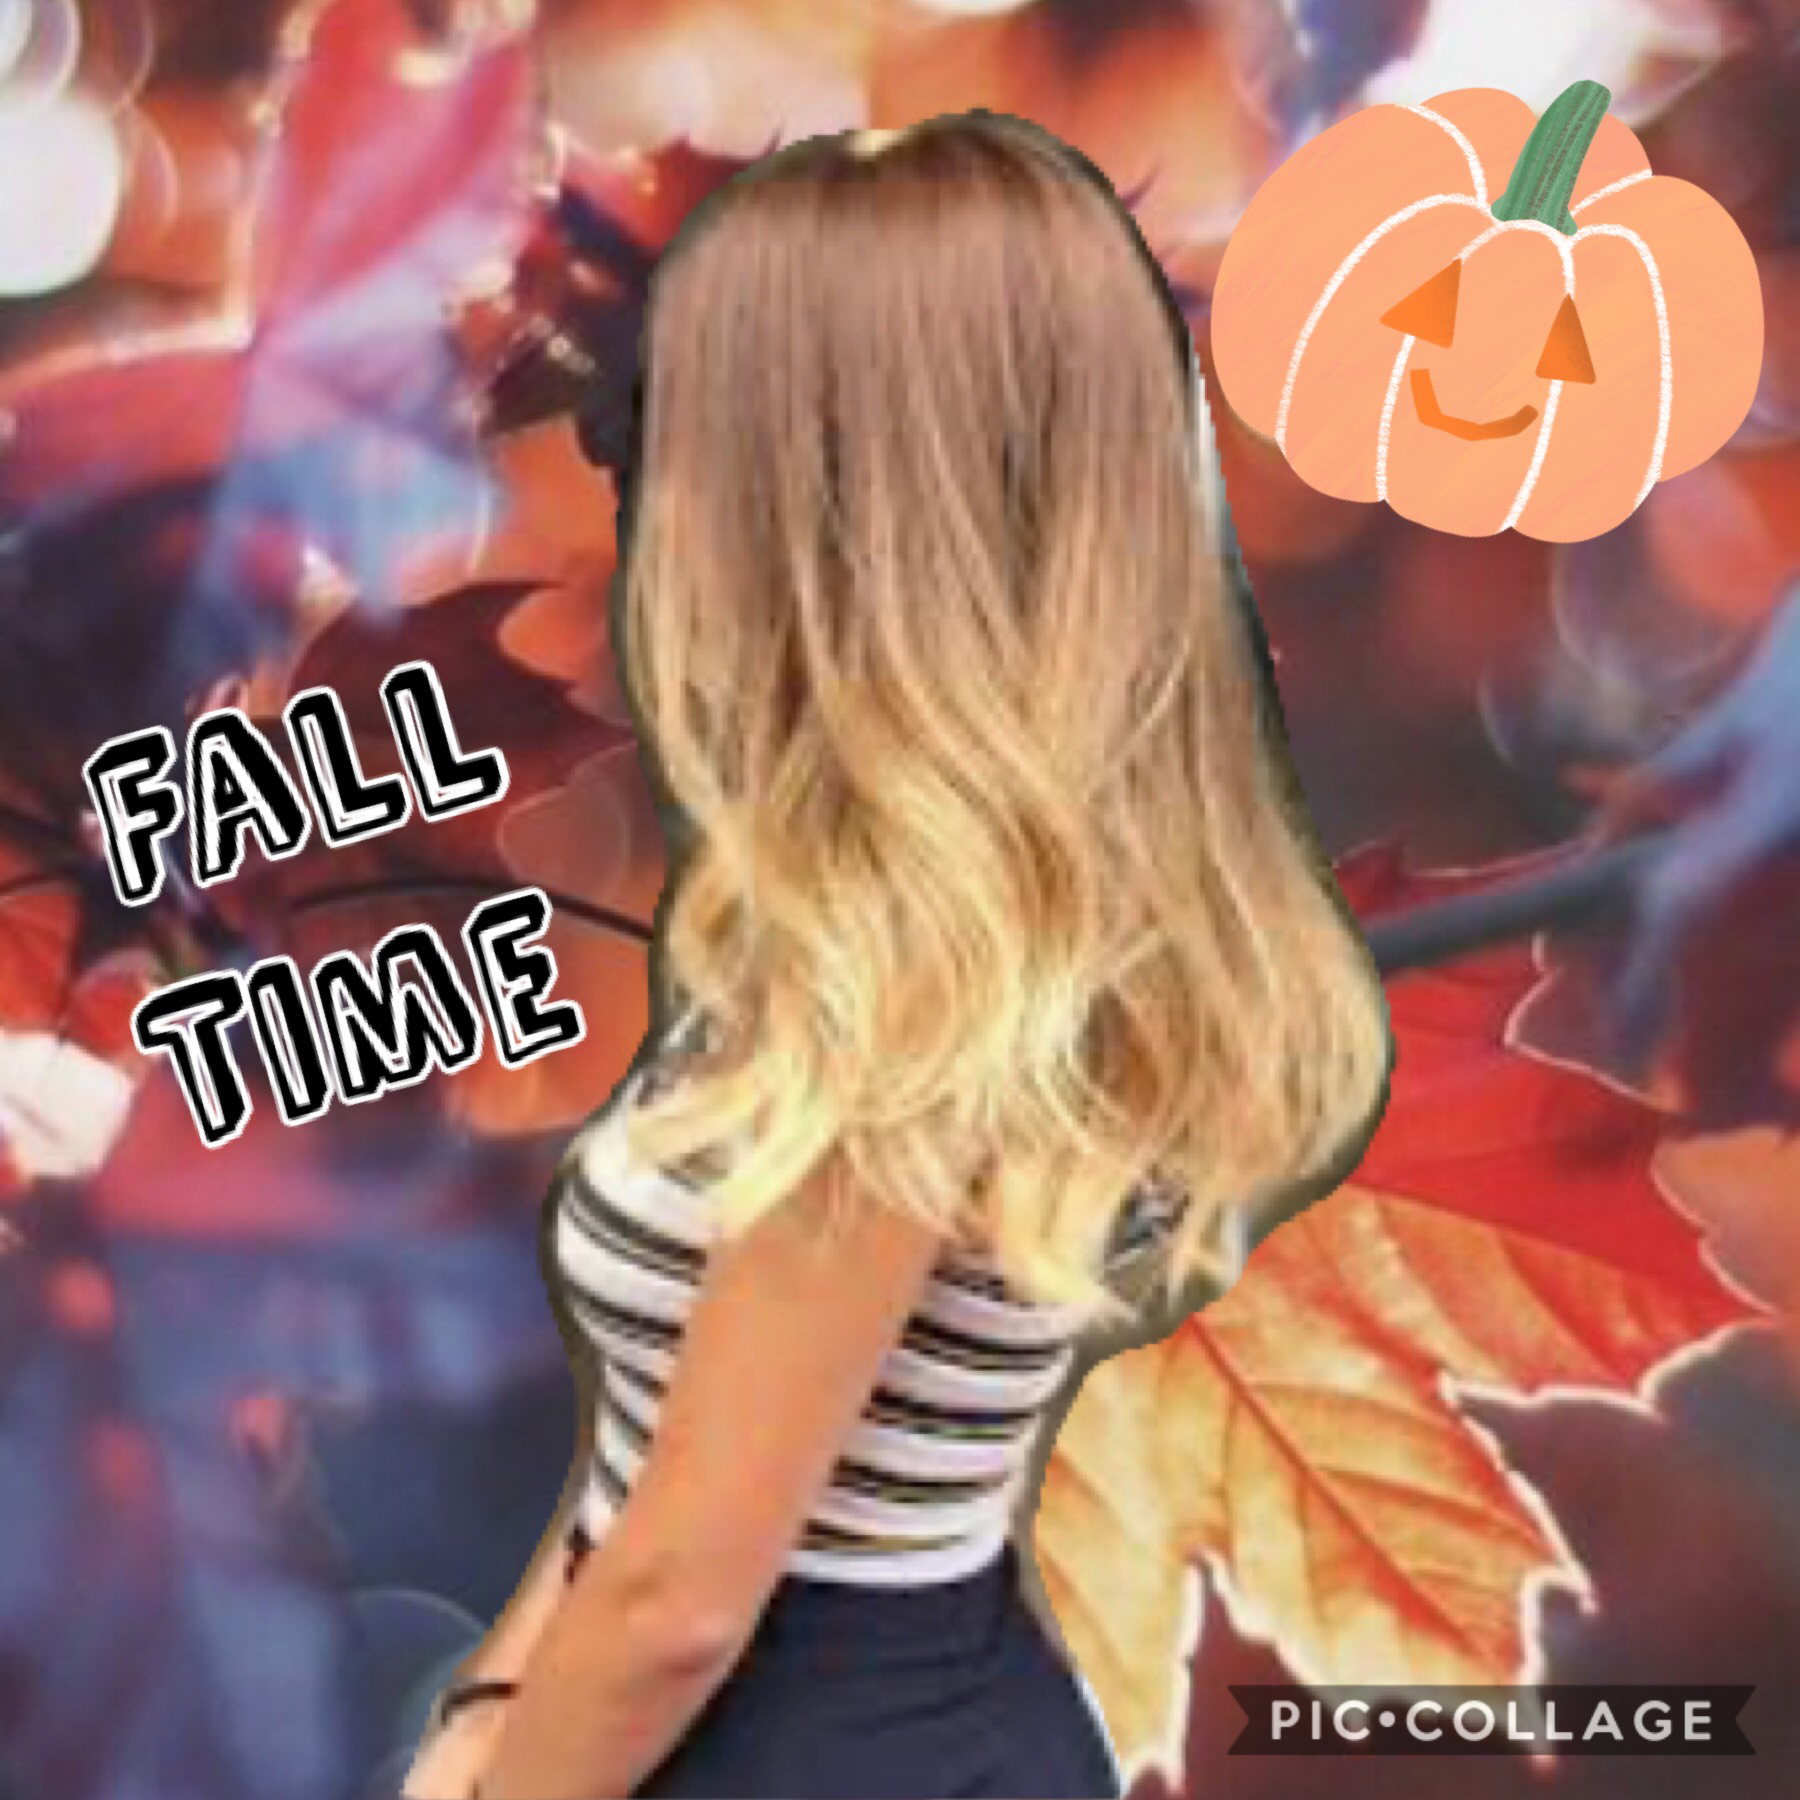 Fall is here & it’s my favourite time of year
🍁🍂🤞❤️